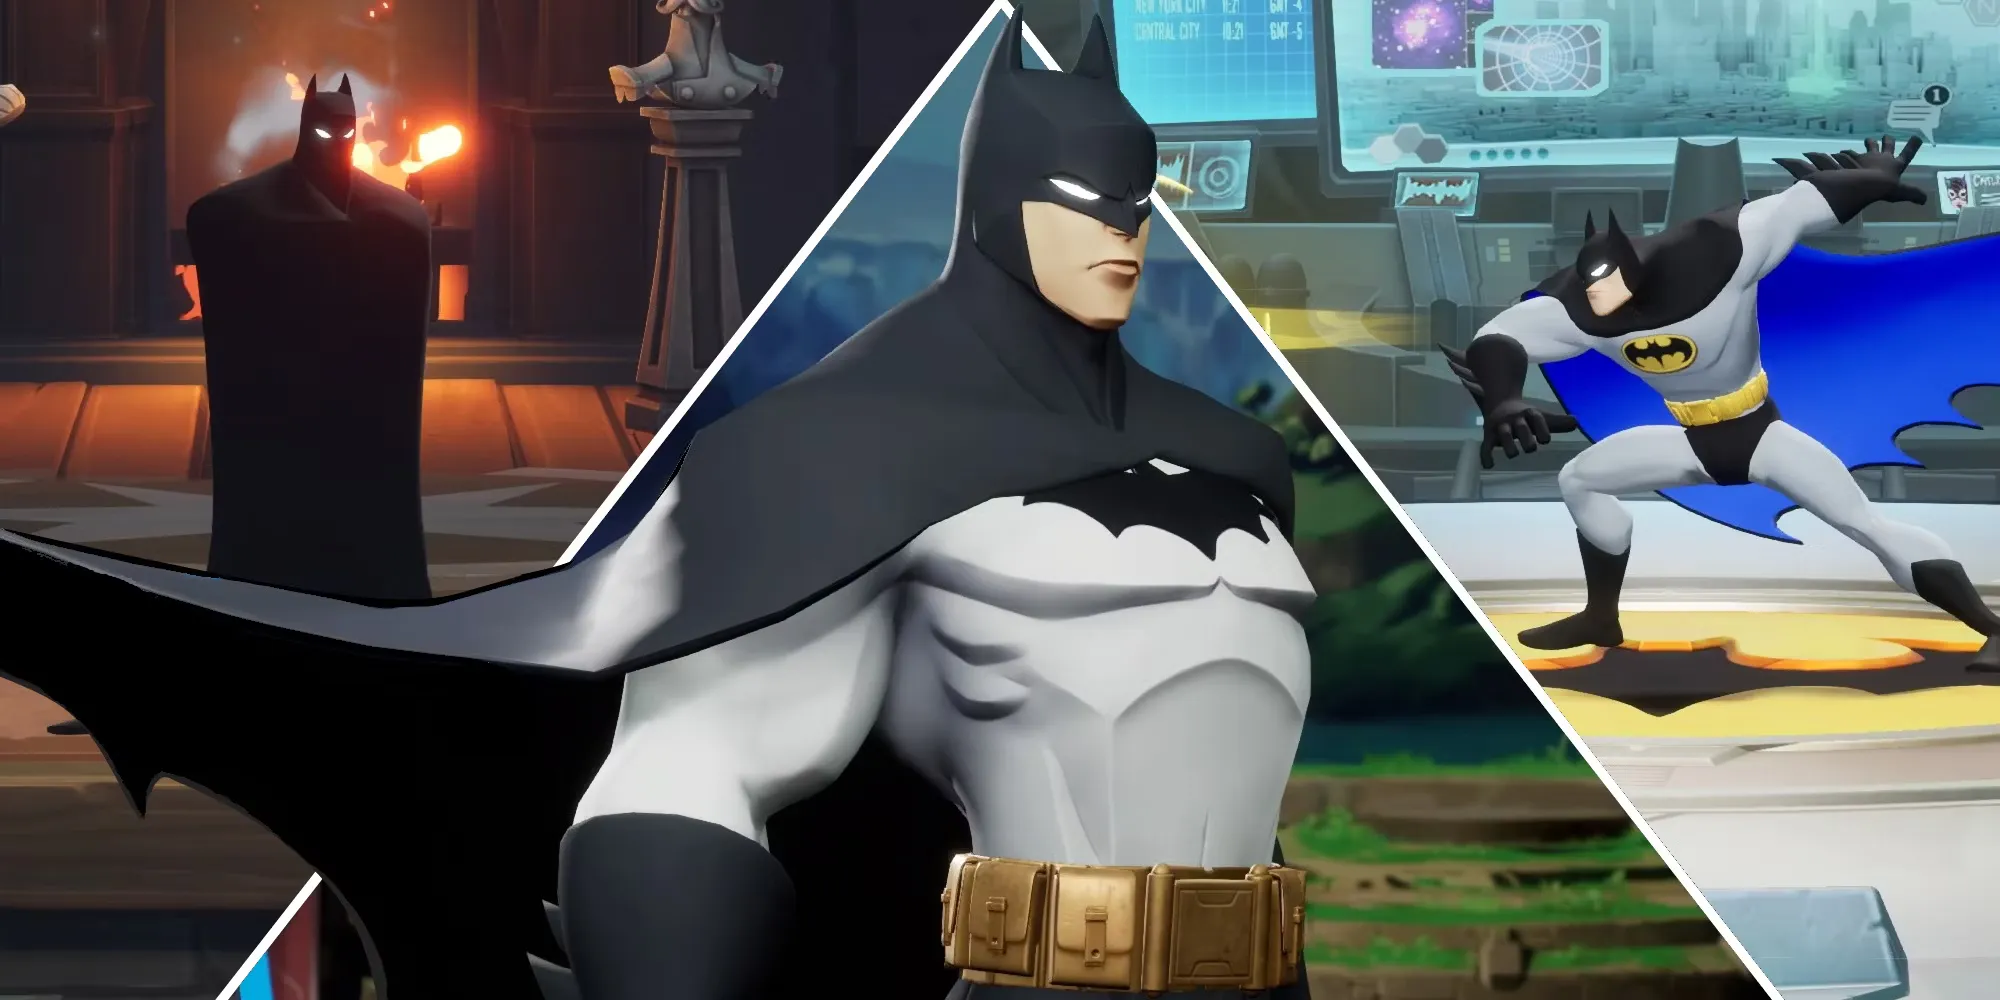 MultiVersus Batman Guide - All Special Moves and Tips